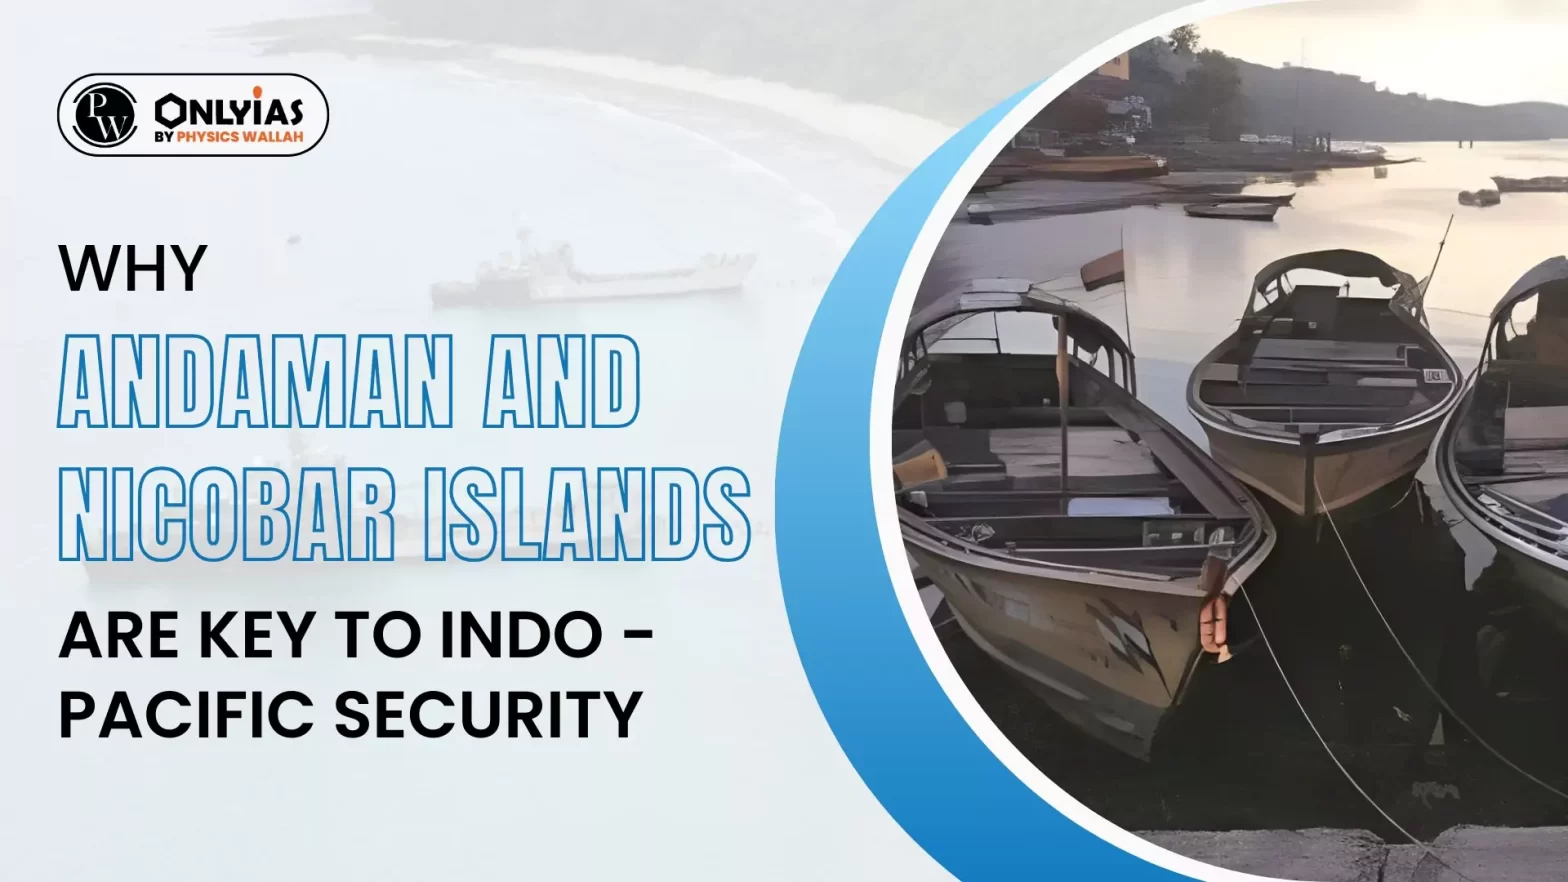 Why Andaman and Nicobar Islands Are key to Indo-Pacific Security